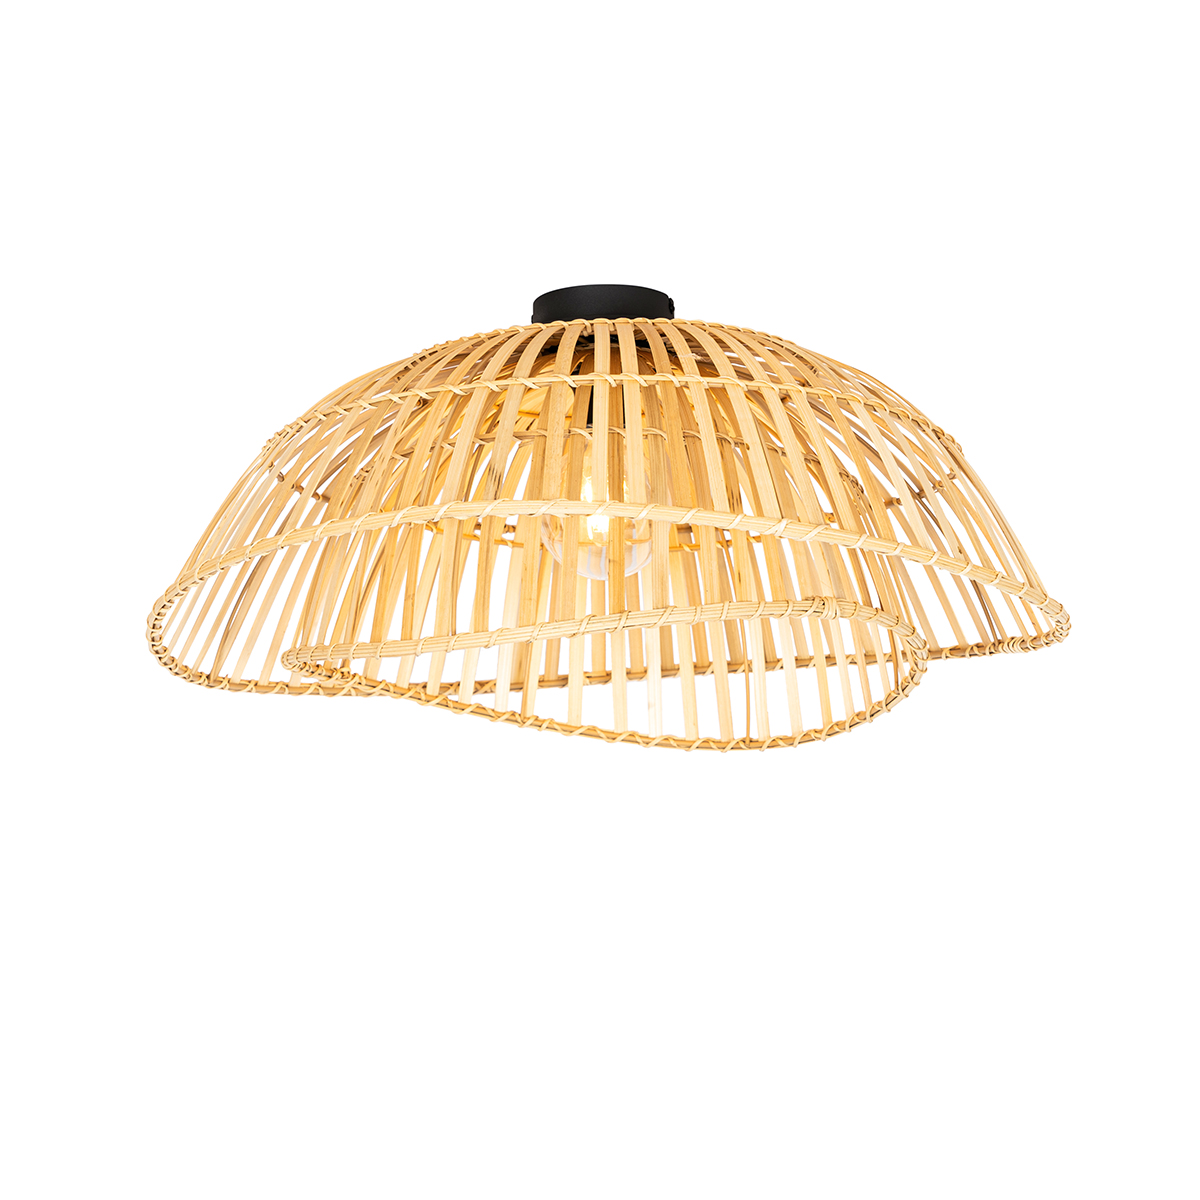 Oriental ceiling lamp black with natural bamboo 62 cm - Pua